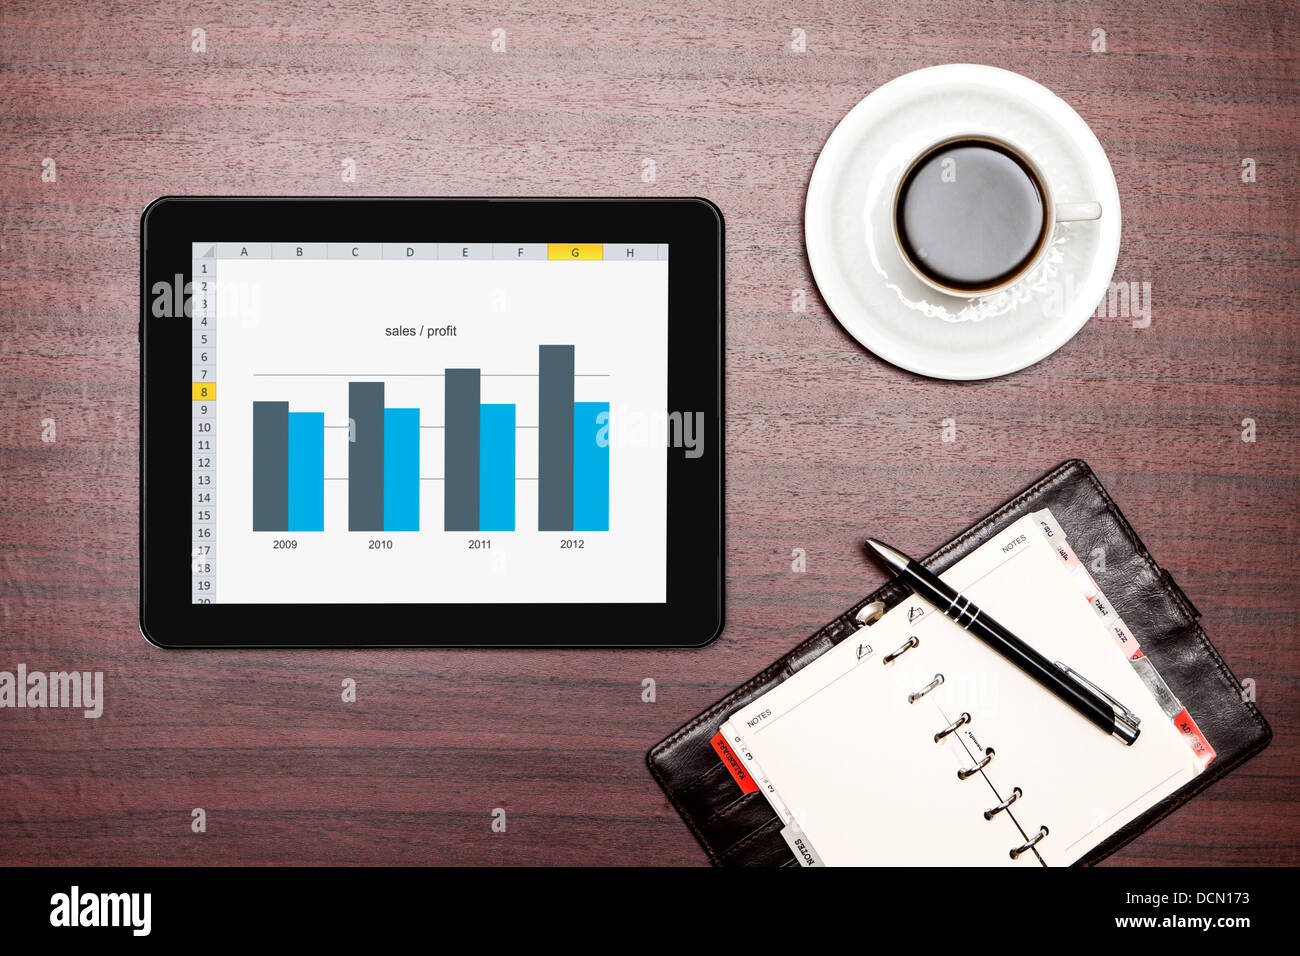 Modern workplace with digital tablet showing charts and diagram on screen Stock Photo